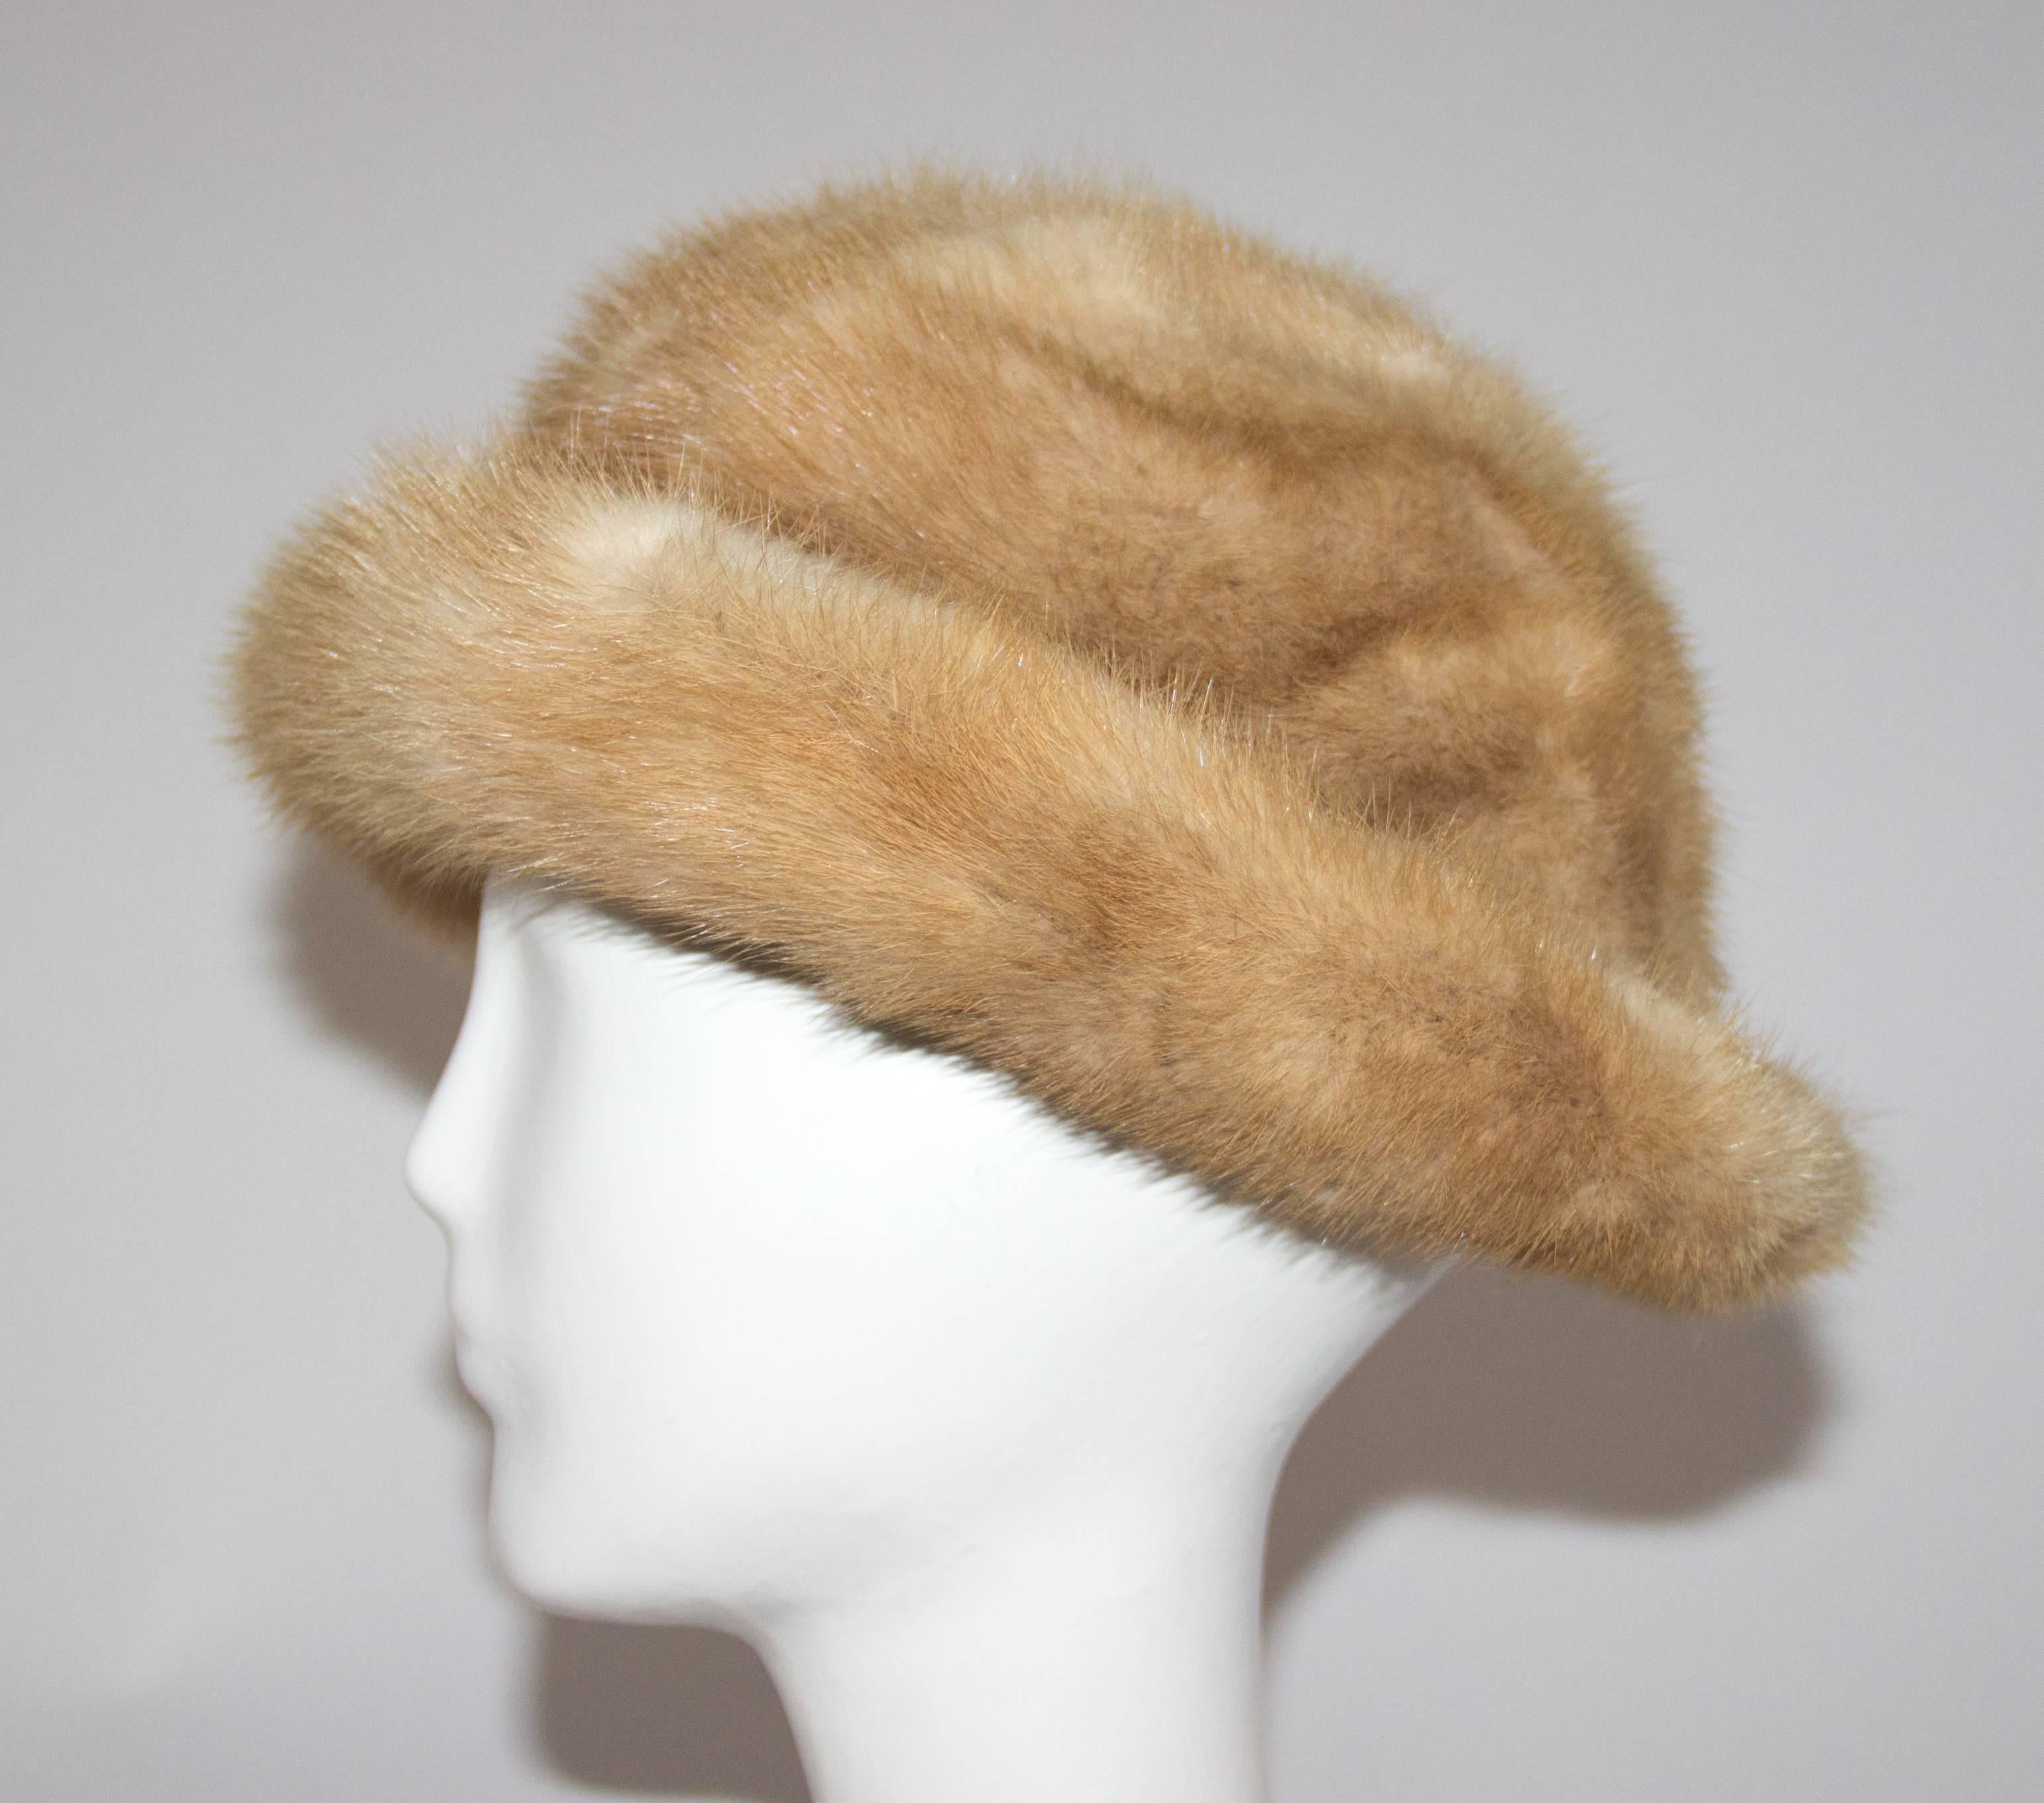 60s Honey Blonde Mink Hat. Fully lined. Gros grain interior lining. 

21 1/2" circumference 